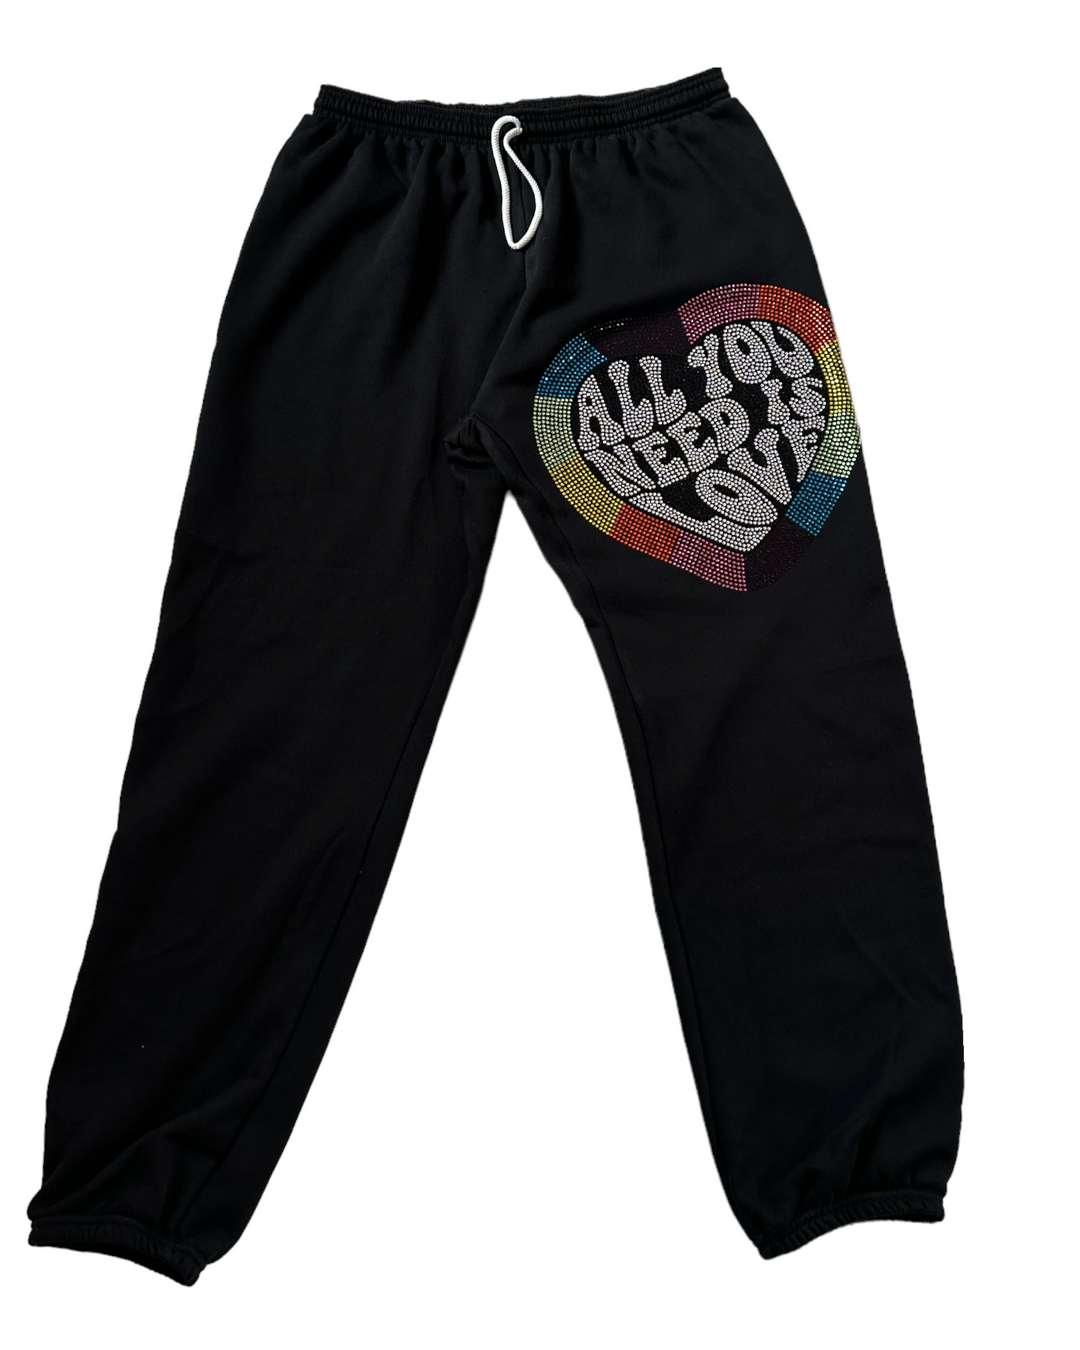 All You Need Is Love Sweatpants